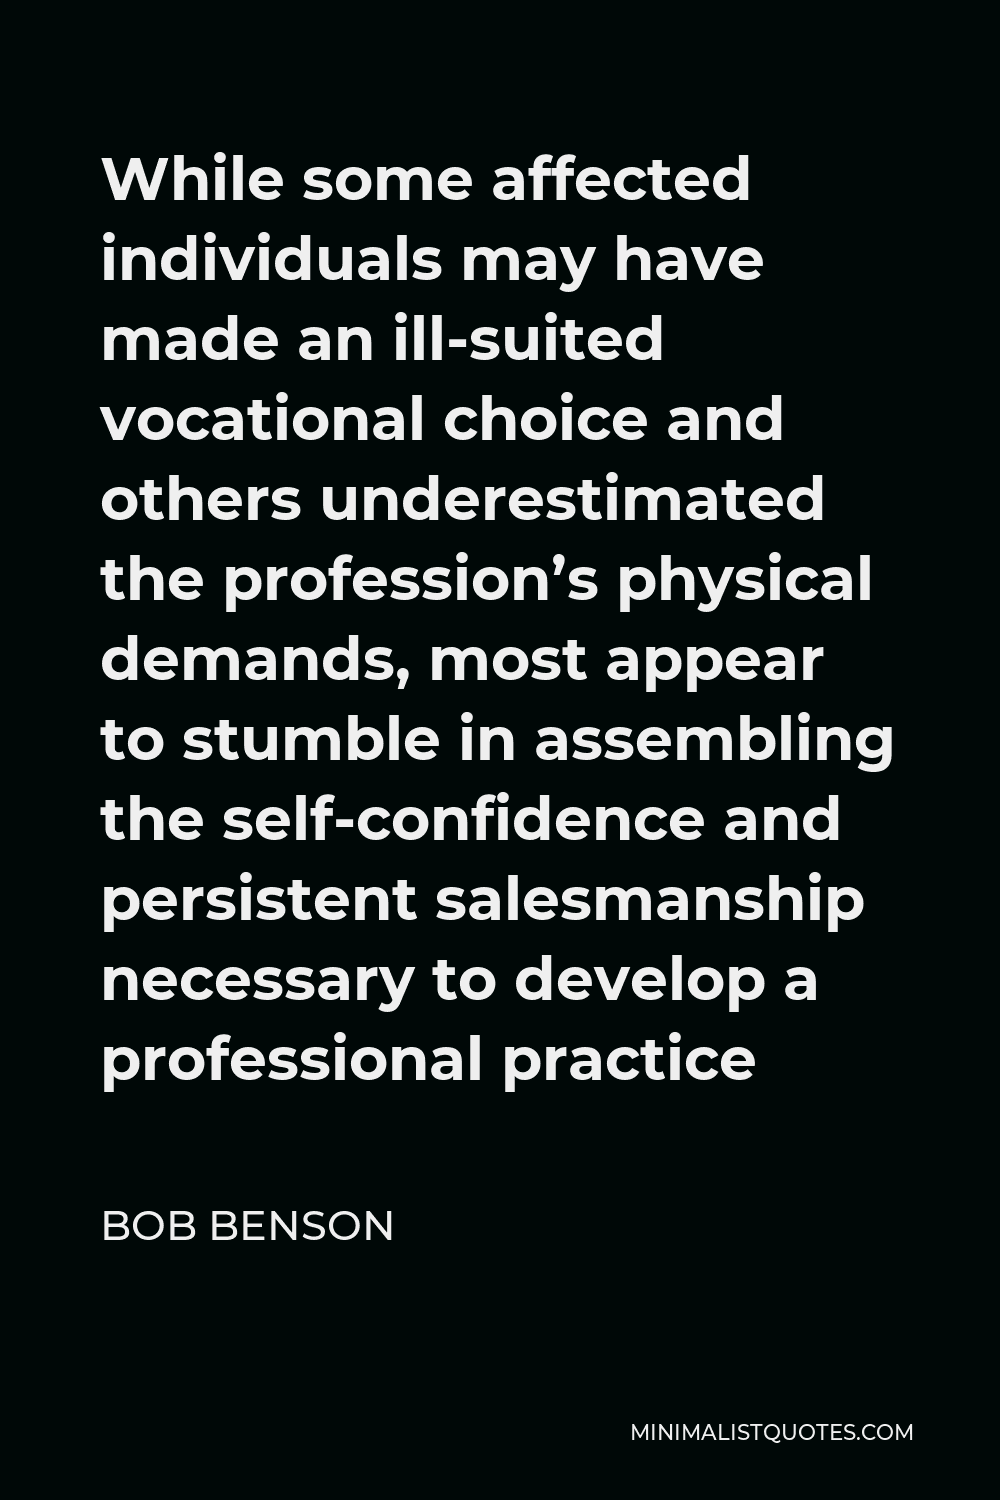 Bob Benson Quote - While some affected individuals may have made an ill-suited vocational choice and others underestimated the profession’s physical demands, most appear to stumble in assembling the self-confidence and persistent salesmanship necessary to develop a professional practice